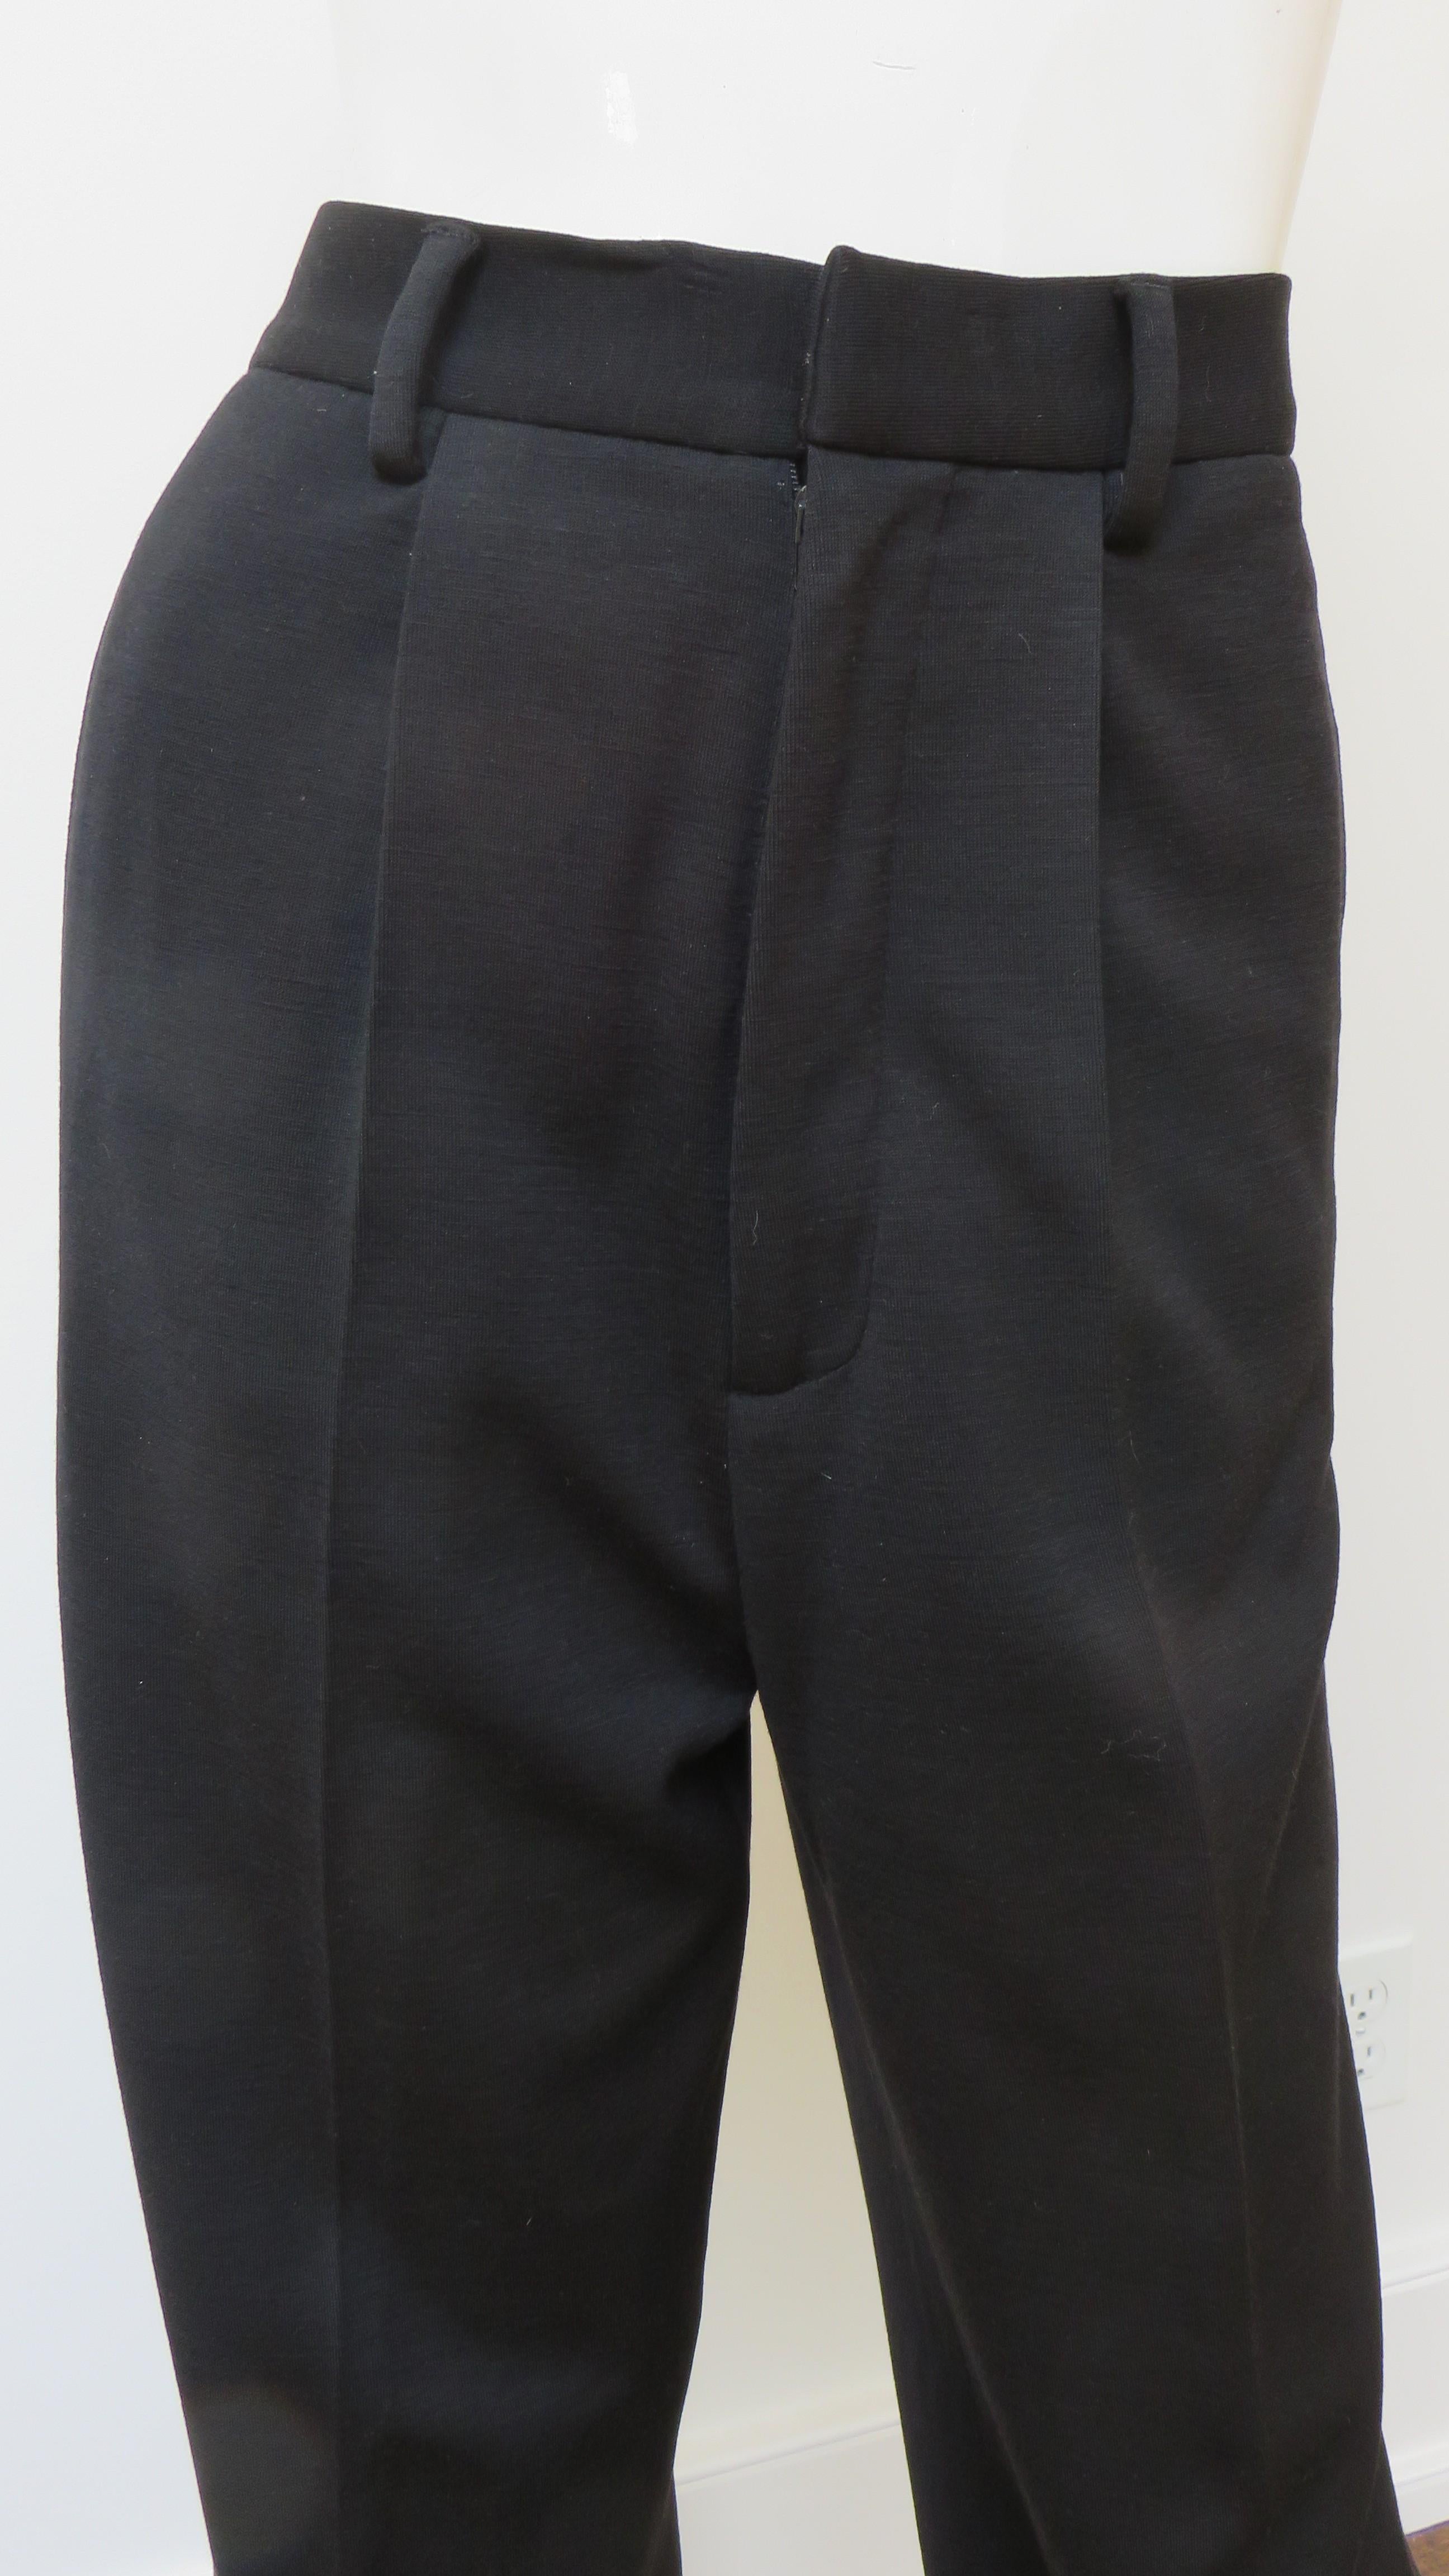 Martin Margiela New Split Leg Pants In Excellent Condition For Sale In Water Mill, NY